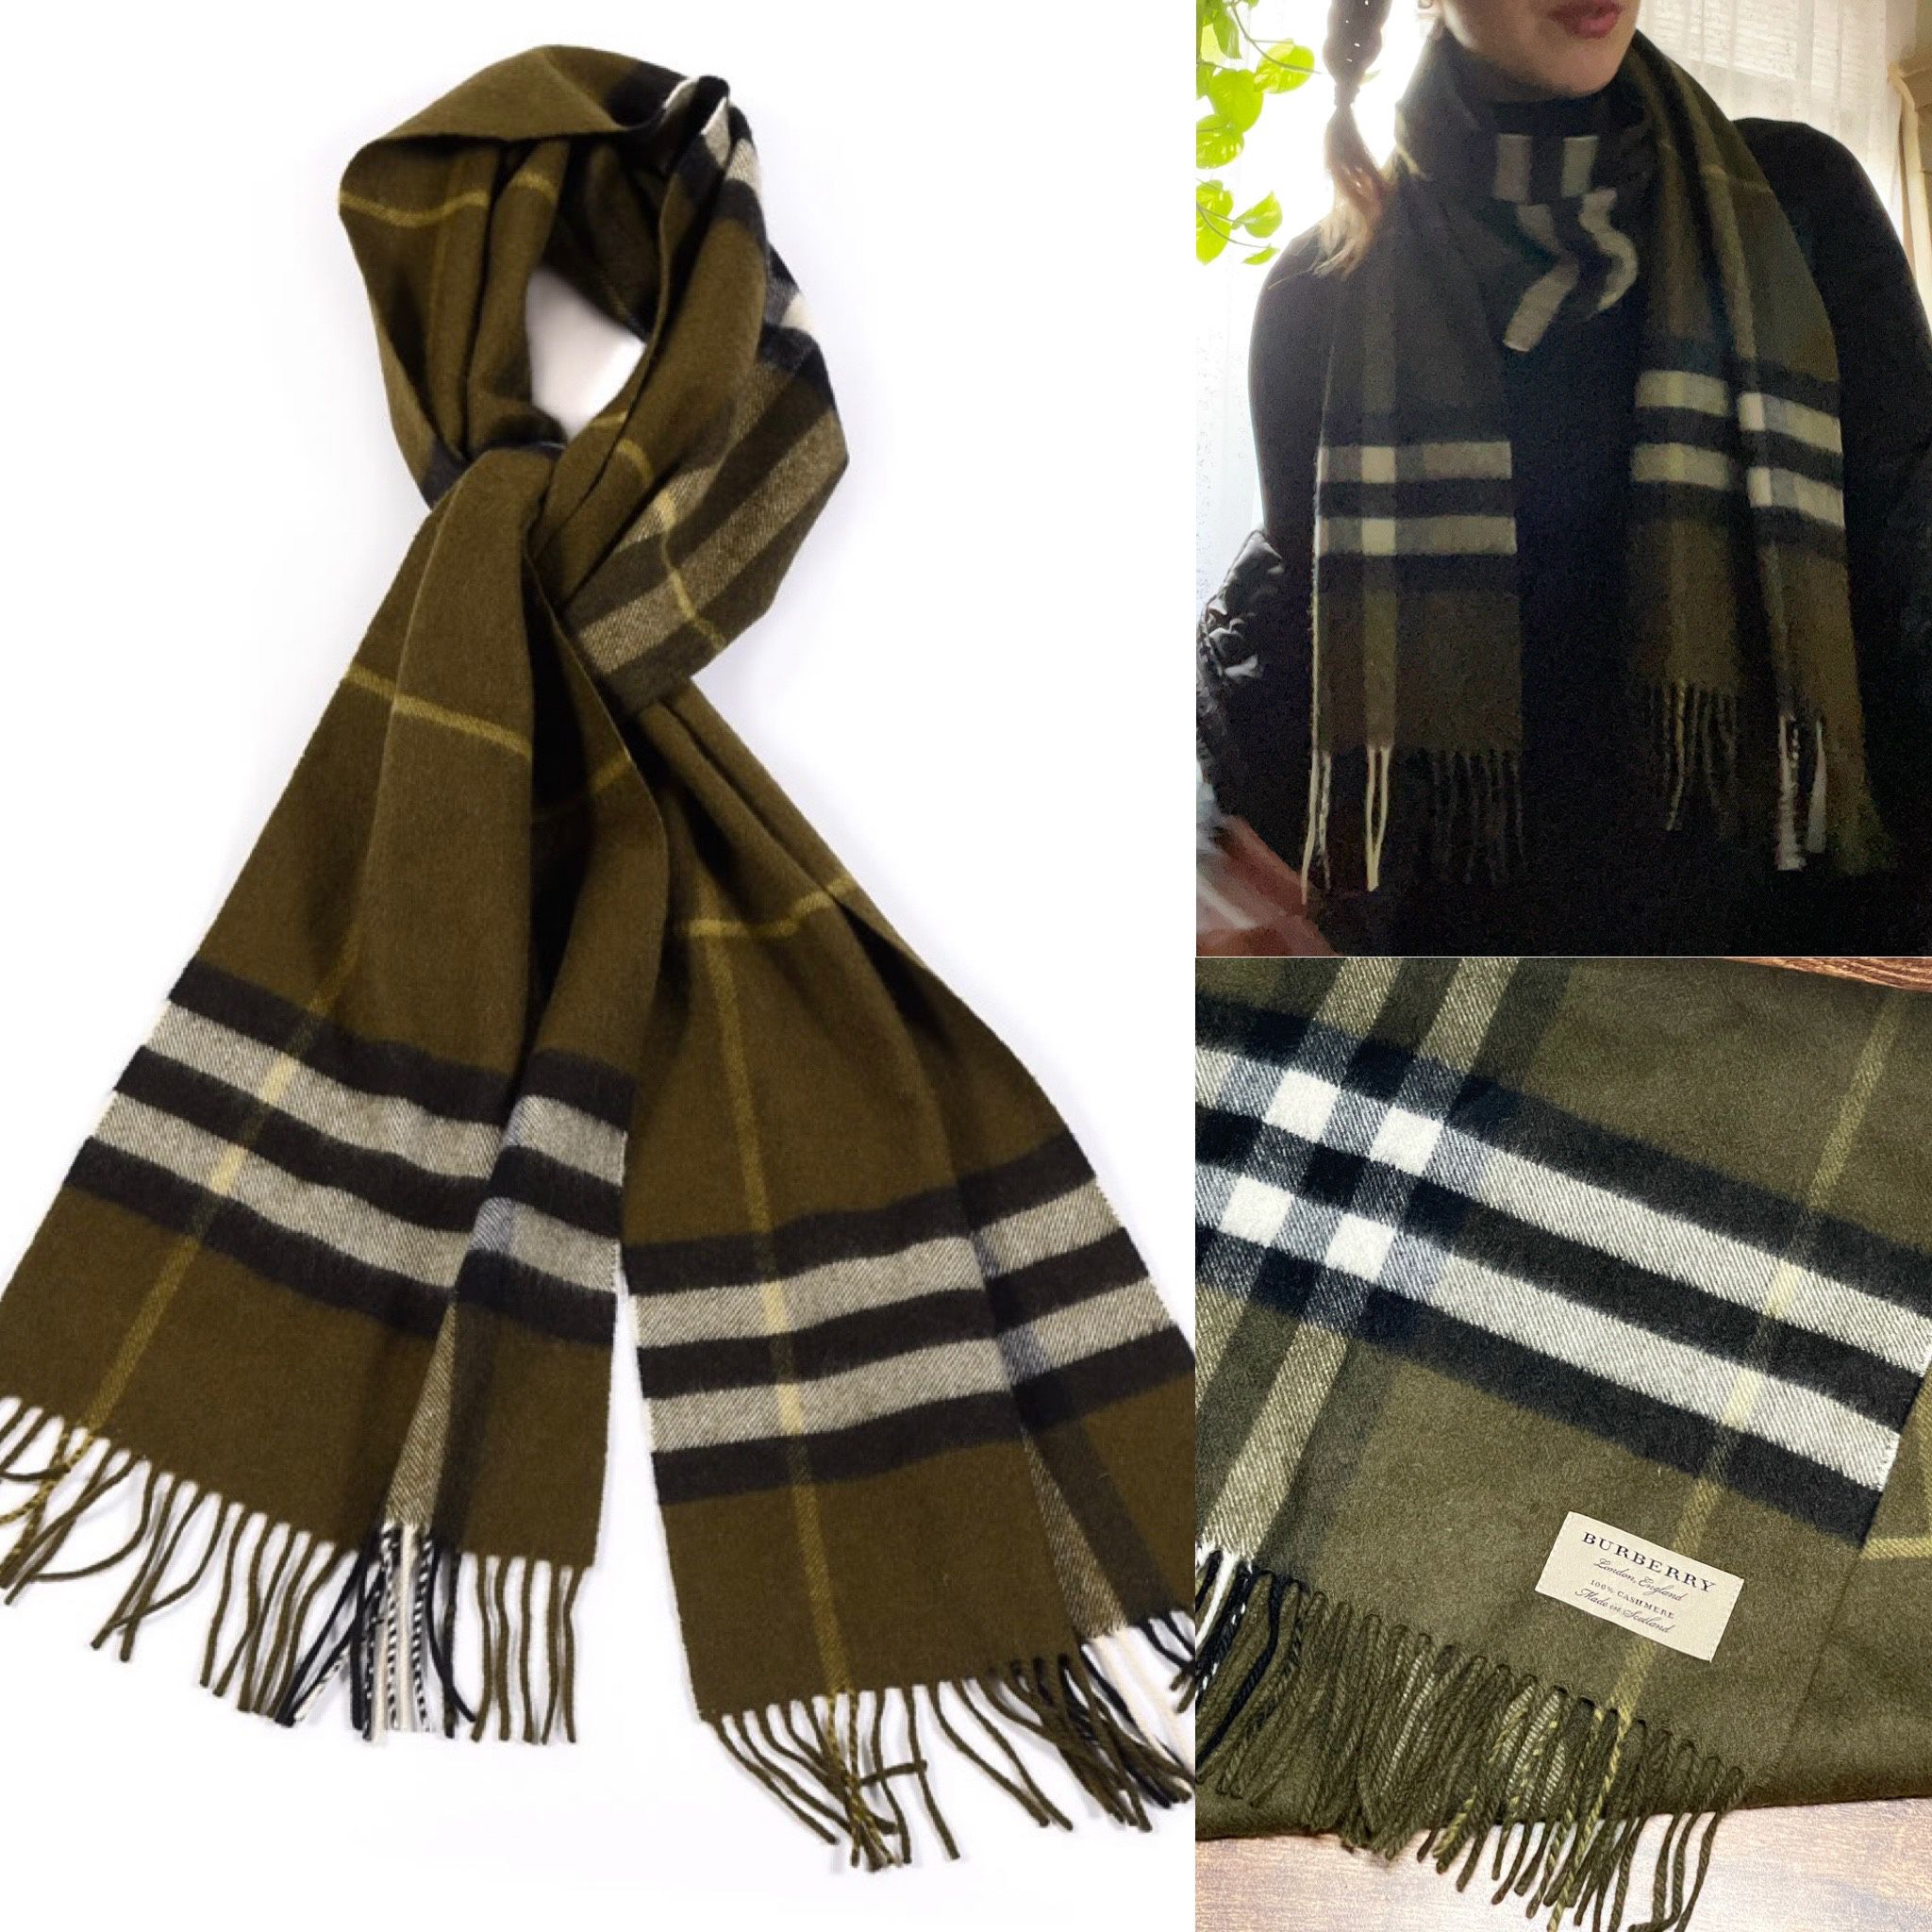 Burberry Cashmere classic check scarf - authentic and rare color with fringe